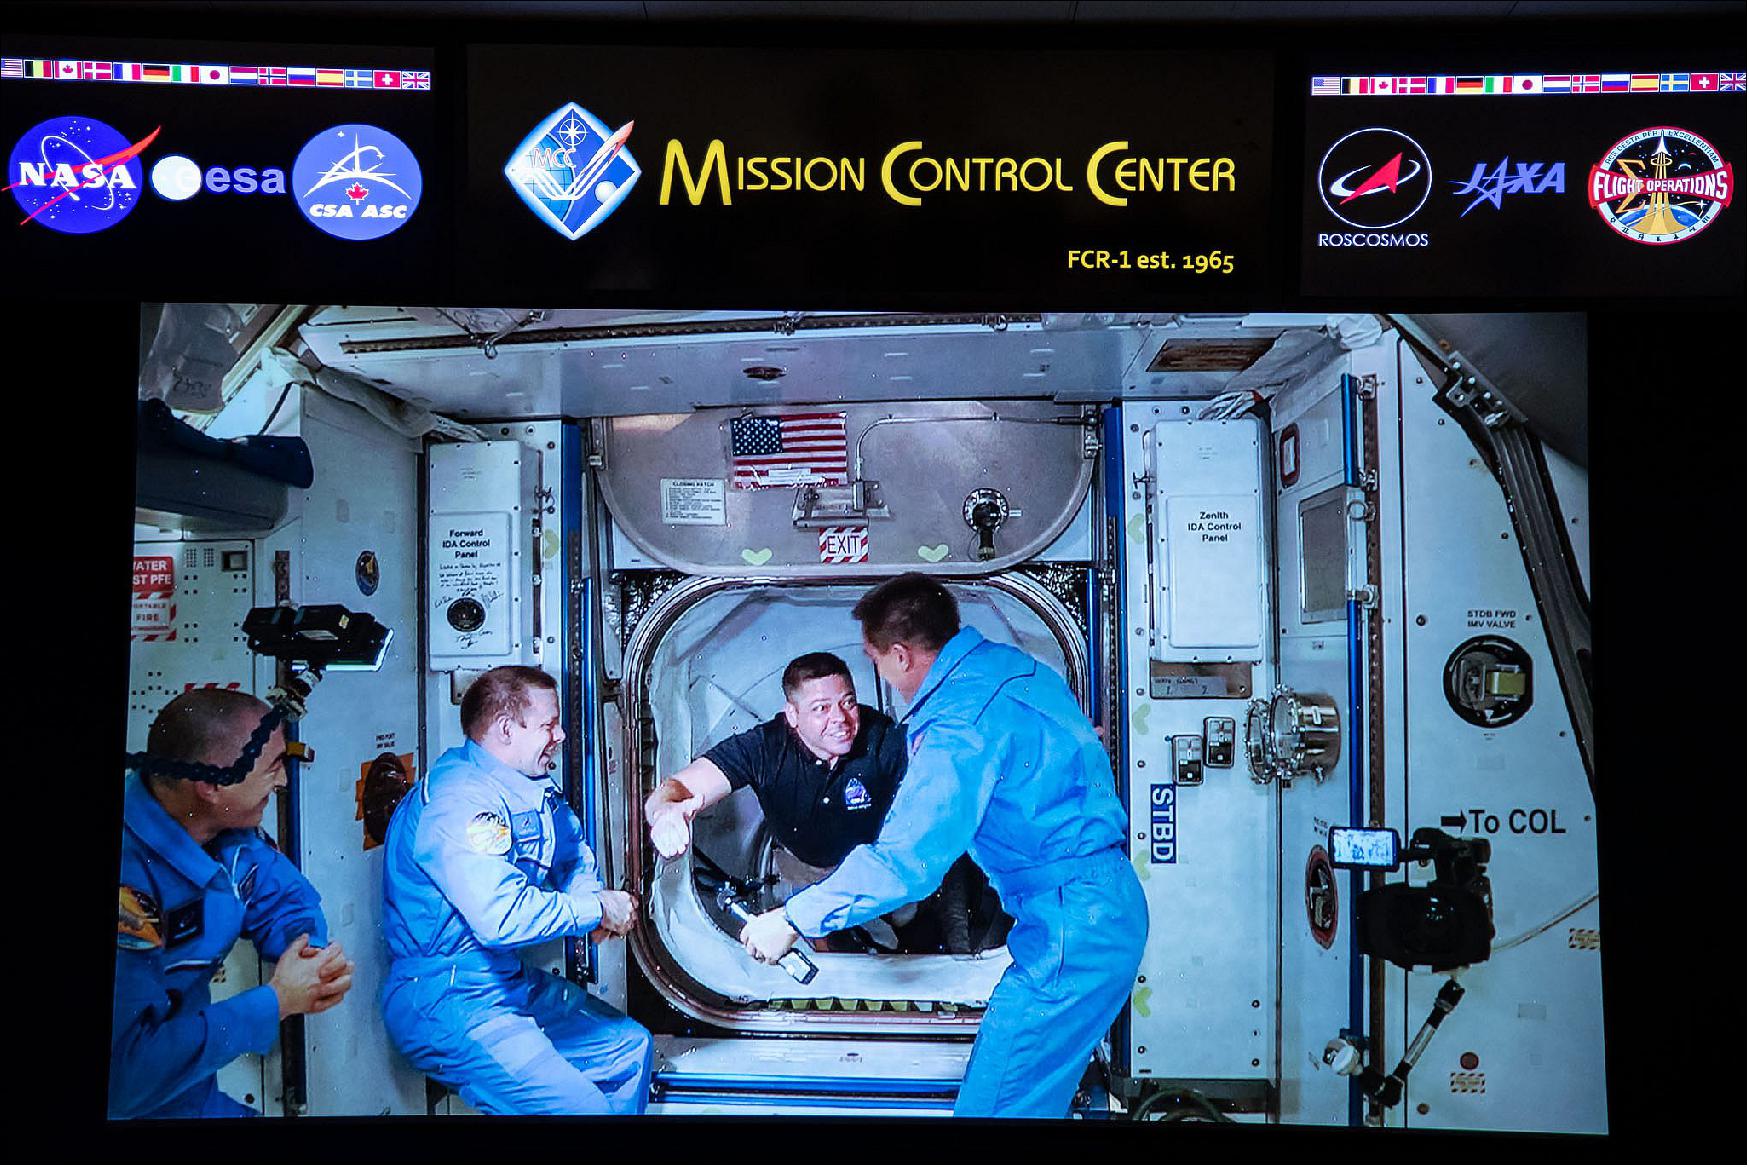 Figure 16: The Expedition 63 crew welcomes Bob Behnken and Doug Hurley to the International Space Station (image credit: NASA, Bill Stafford)